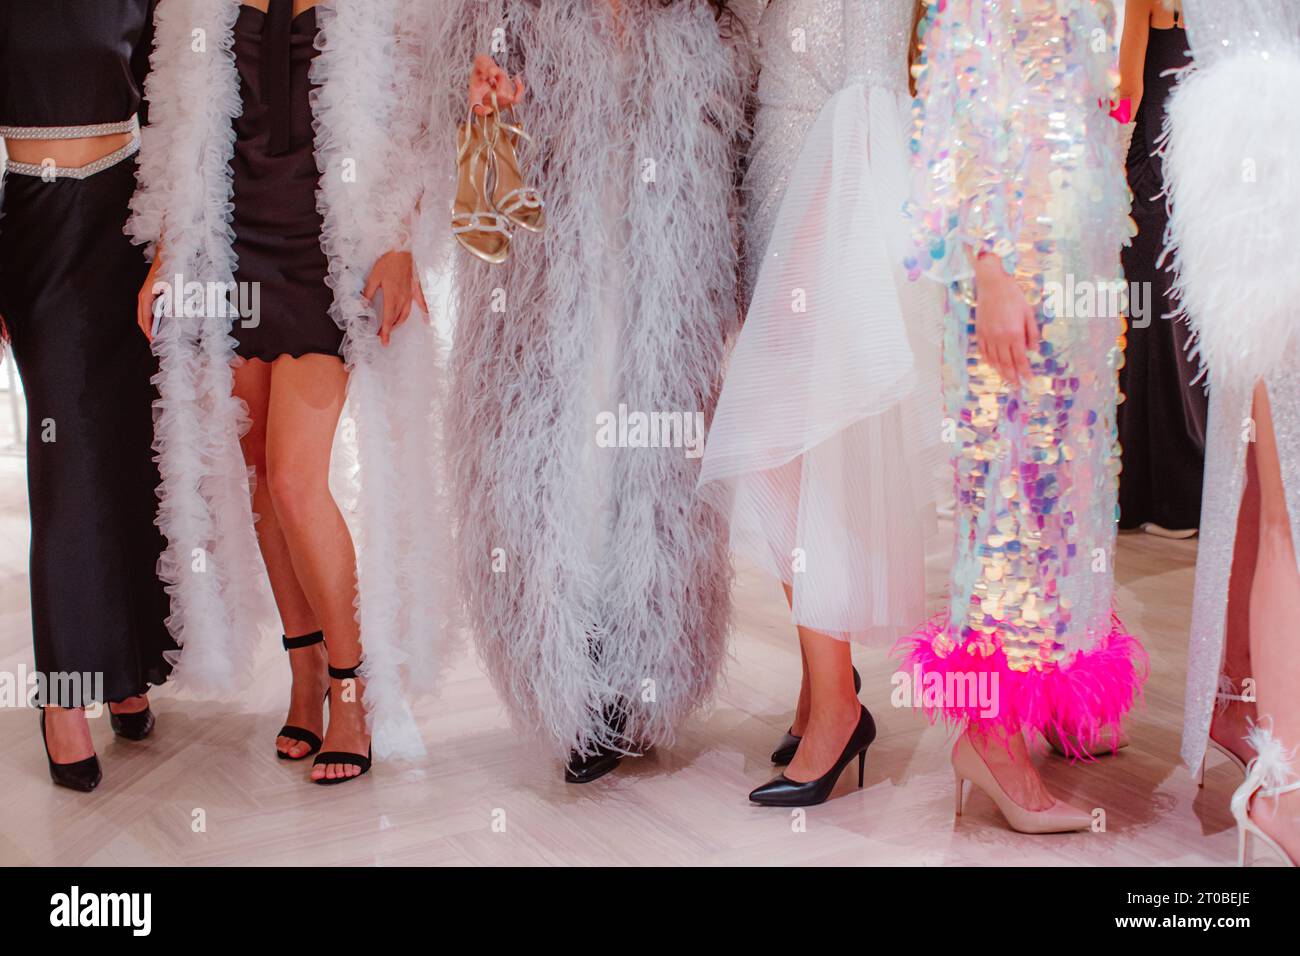 Fashion models on backstage dressed in a long Haute couture boudoir dresses outfits and high heels. Preparation before the fashion show Stock Photo